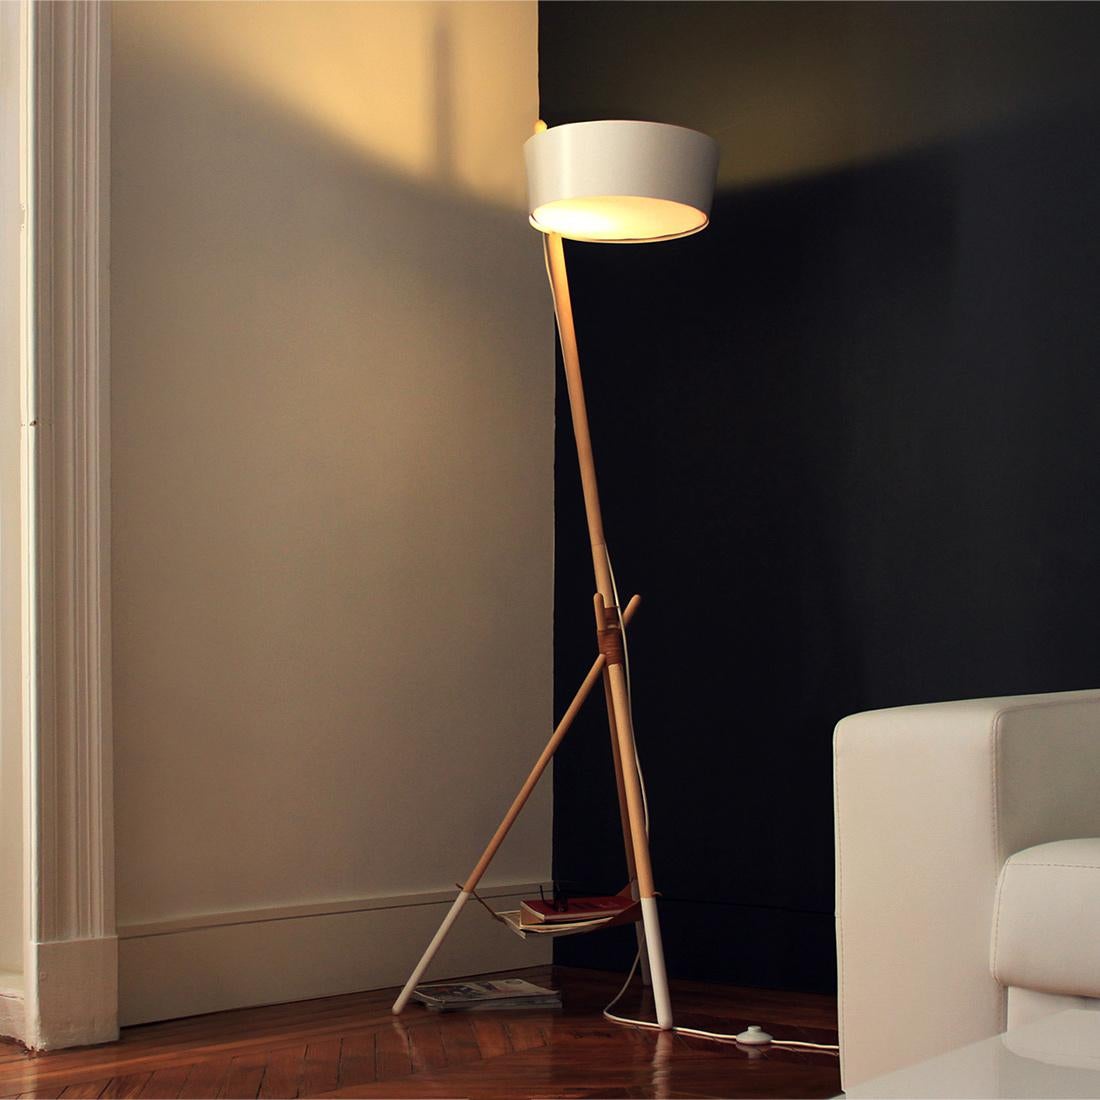 The largest in the Ka family is a standing floor lamp that radiates for its ambient light.

Combine quality wood, design, elegance and light and the result will be our wooden floor lamp in black. Just what your home needs!

This piece its